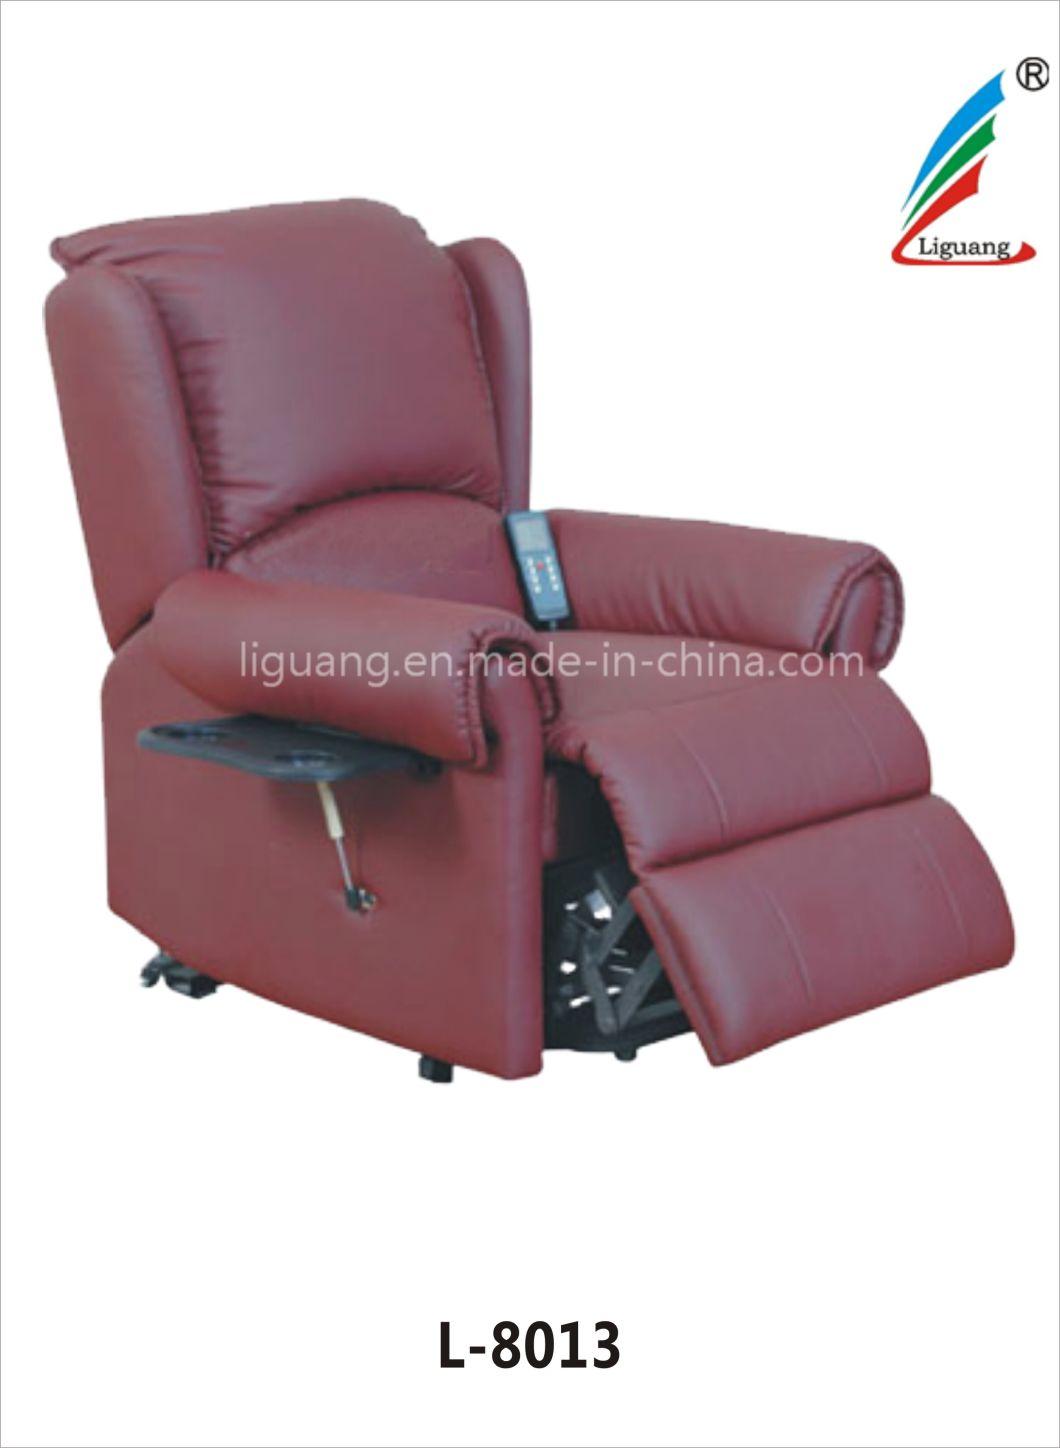 in 2018, Jialin′s New Special Offer, Simple Foot Massage Chair